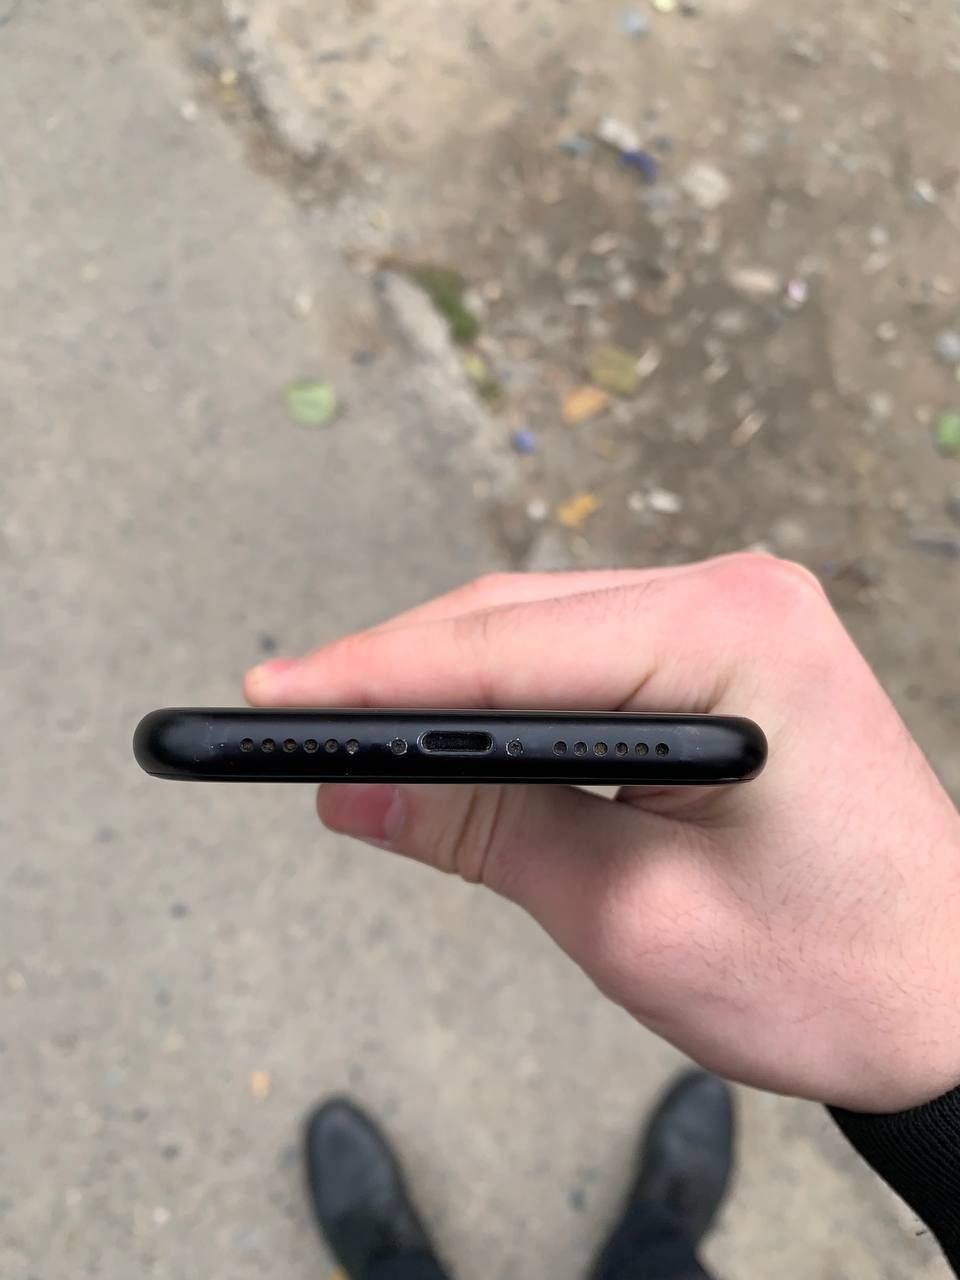 Iphone Xr 128Gb Battery: 80%